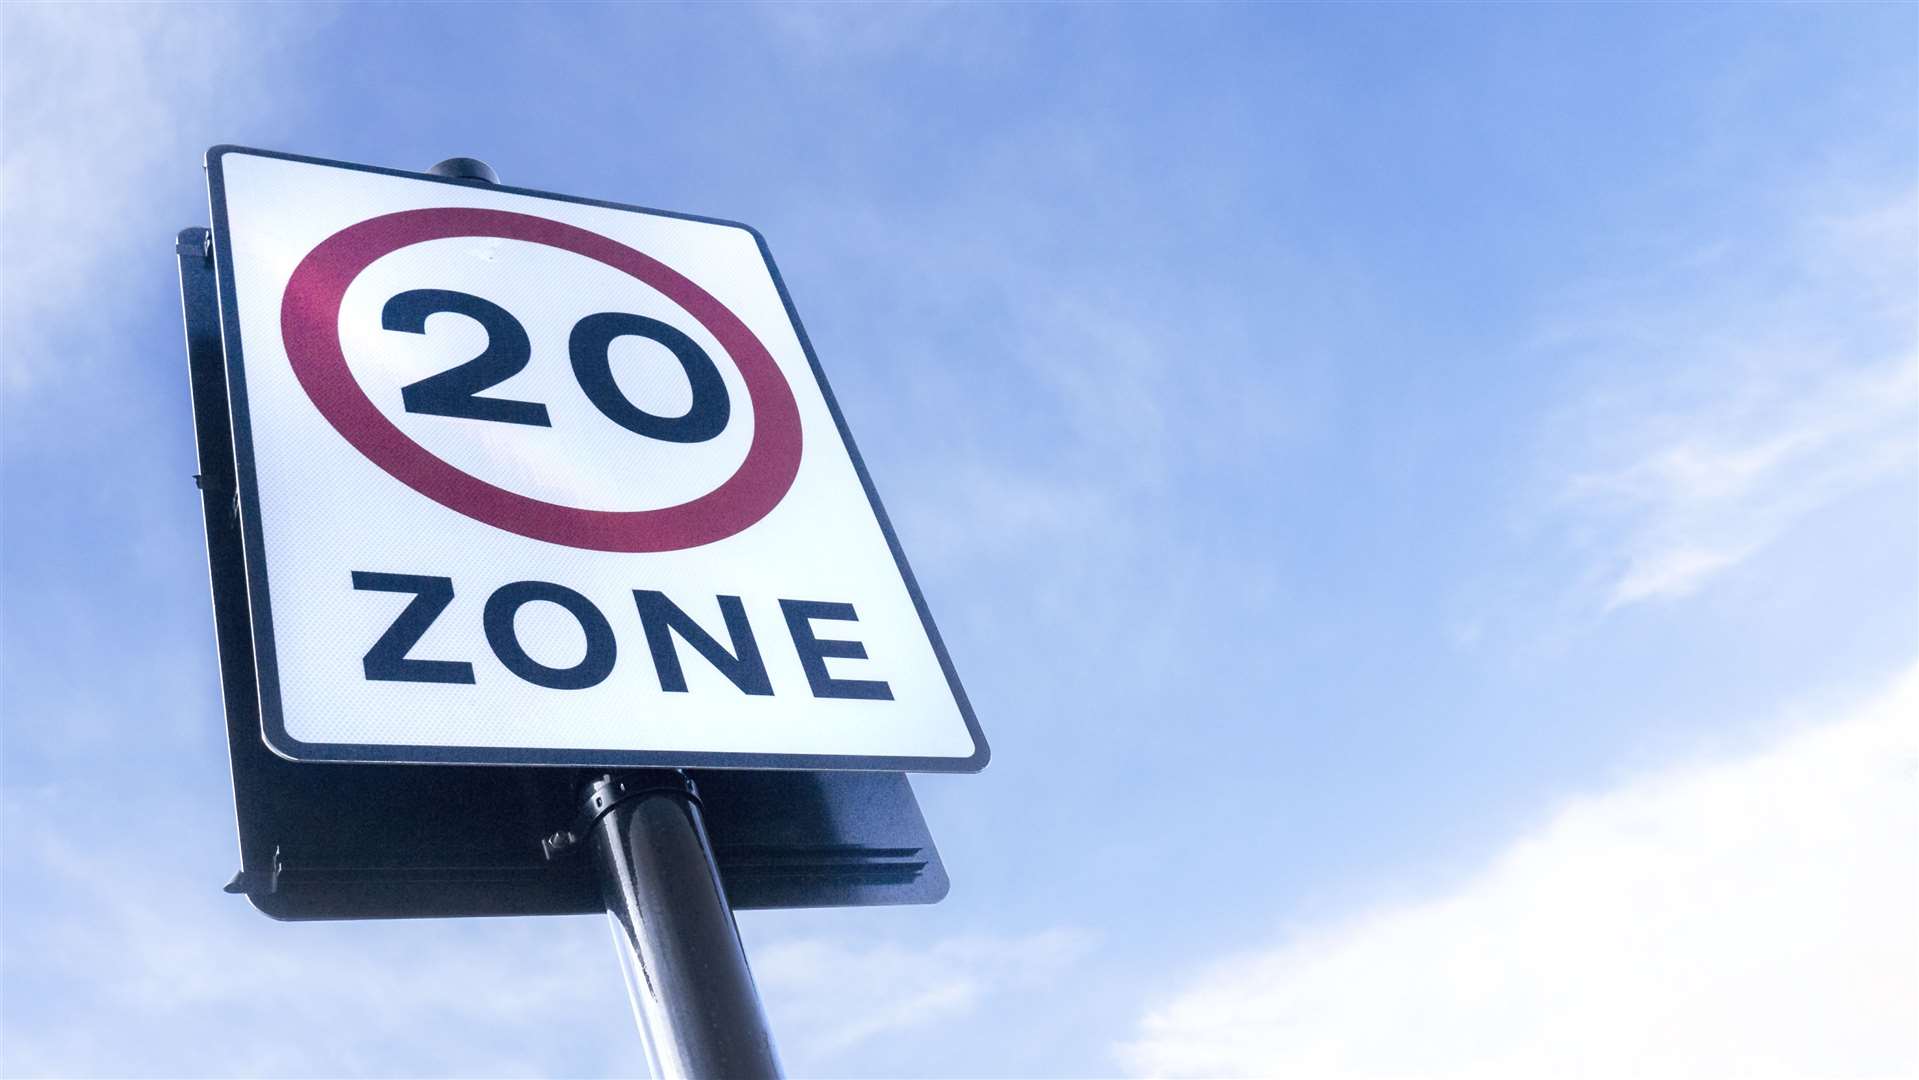 20mph limits apply around most schools – but everyone knows they are often flouted. The competition aims to find fresh ways to get a potentially life-saving message across.